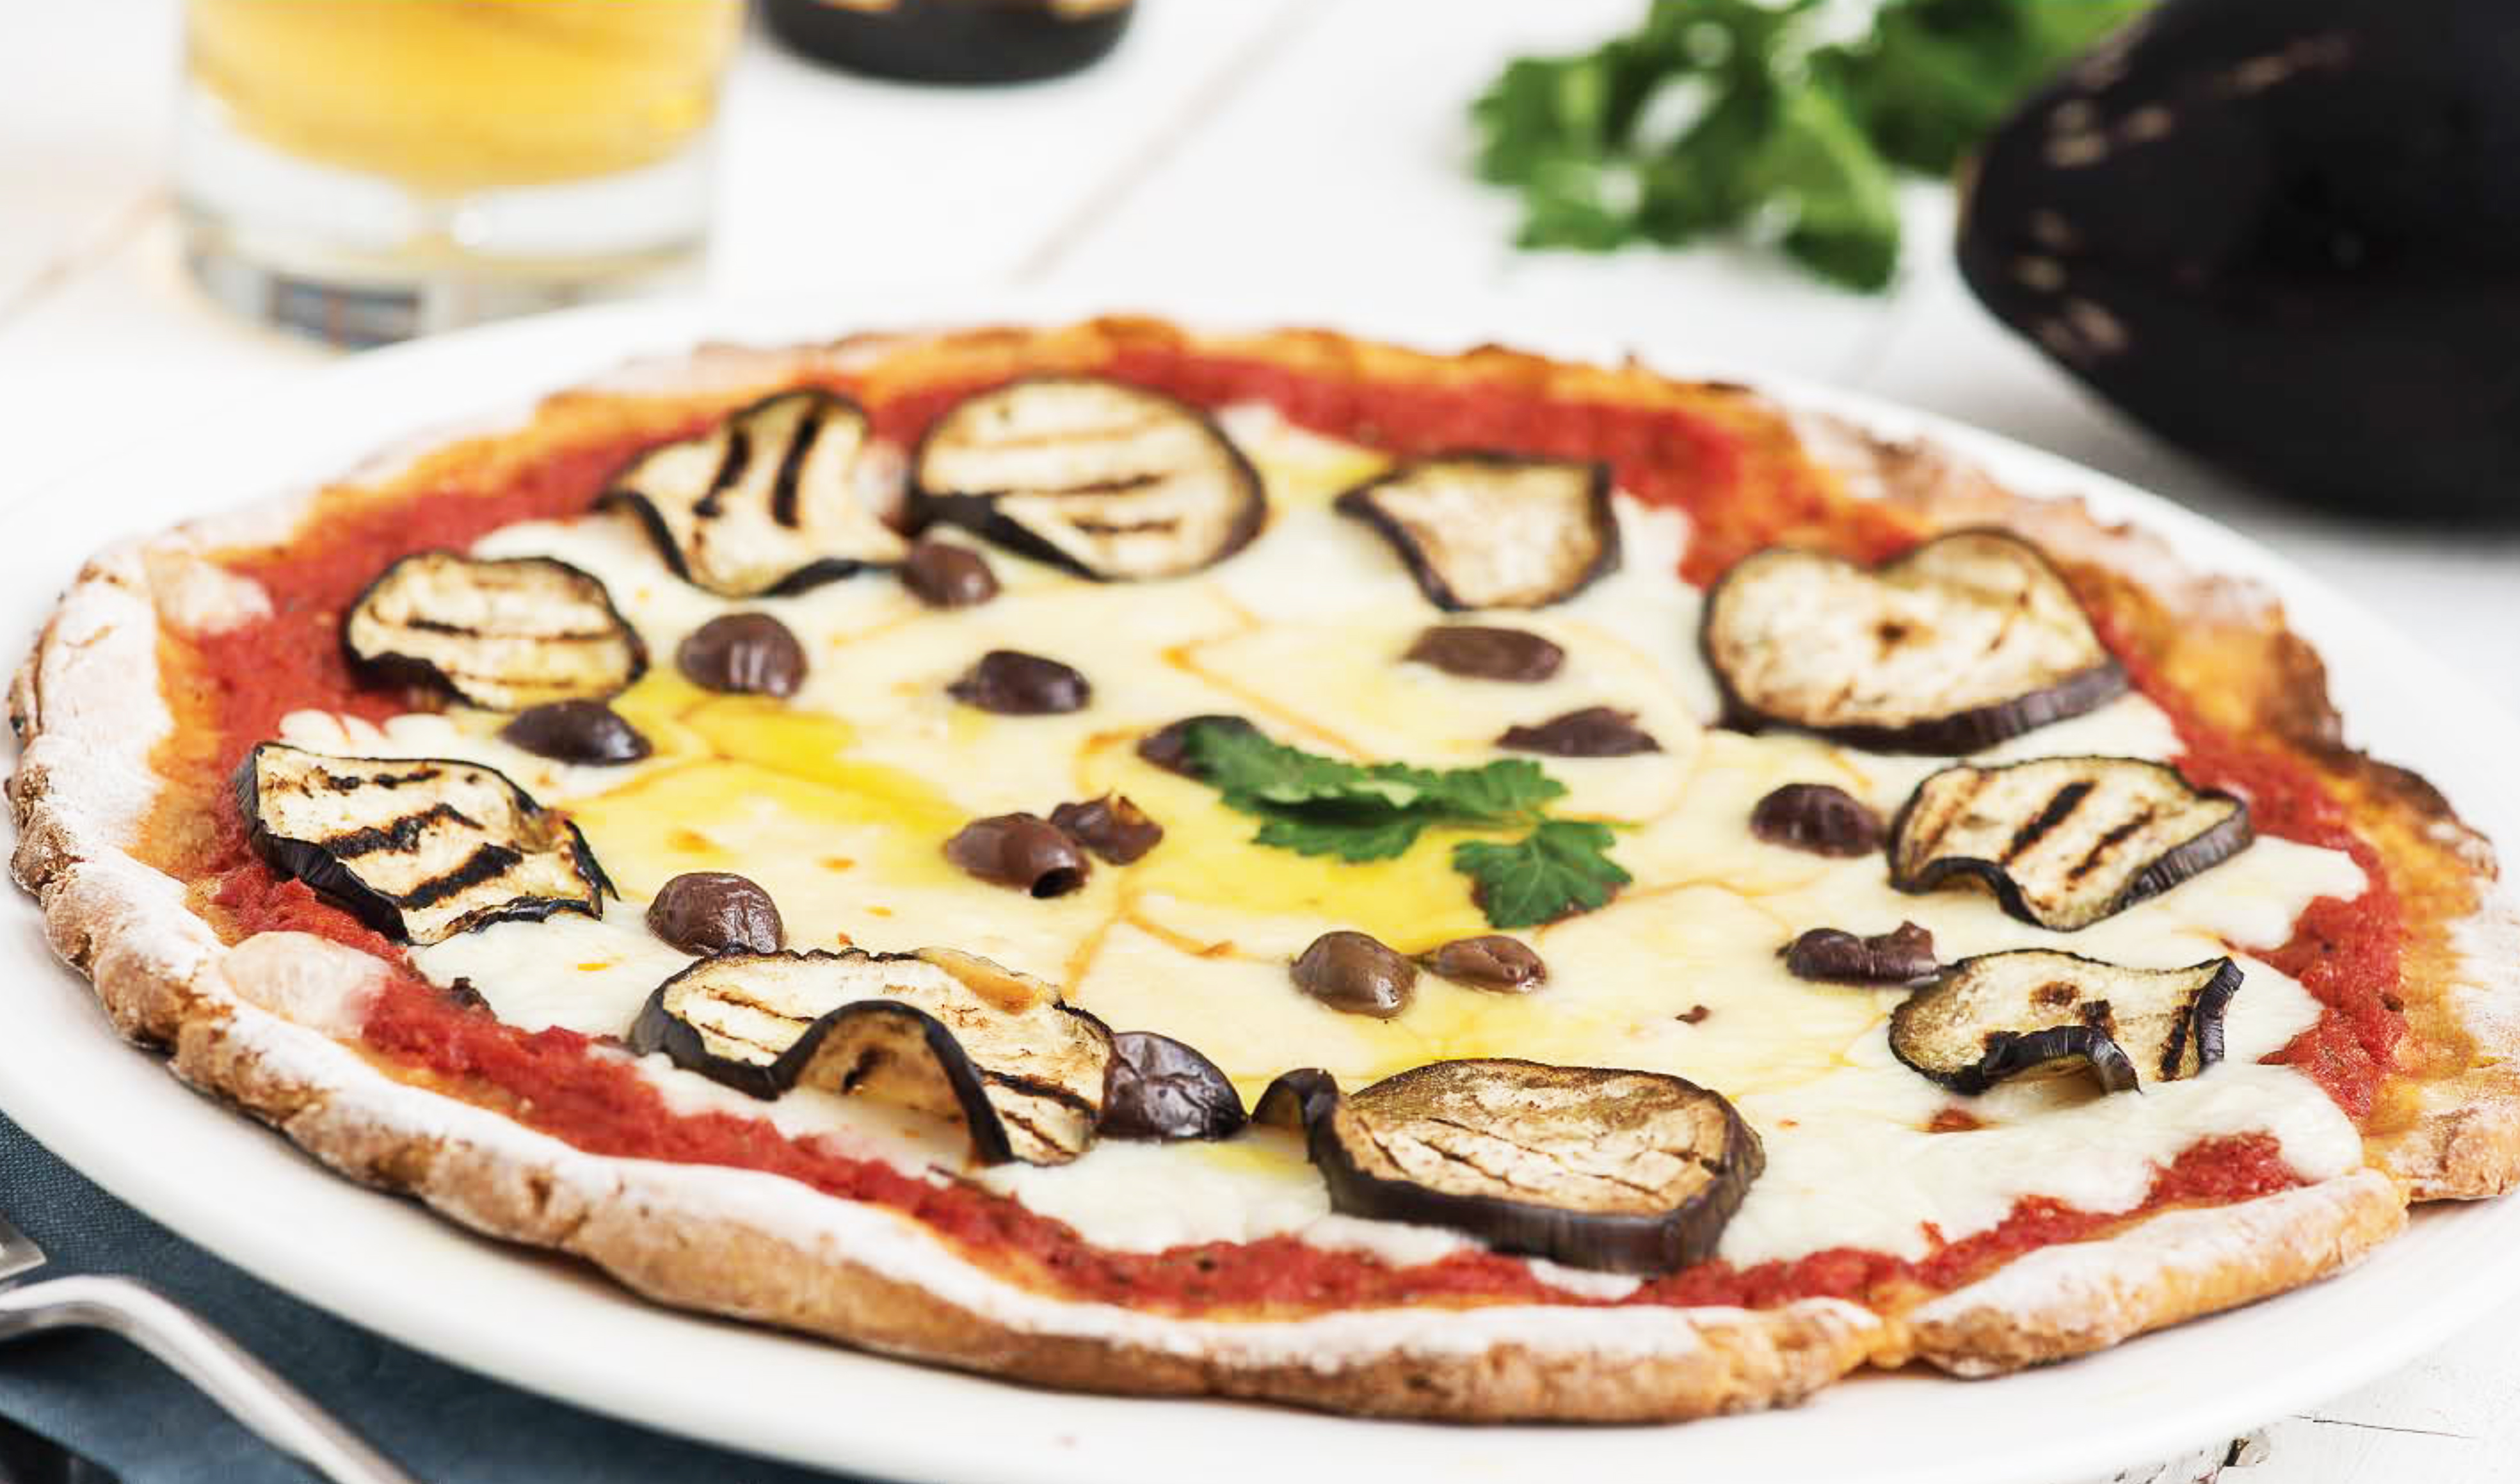 Gluten-free pizza with scamorza, olives and grilled eggplant